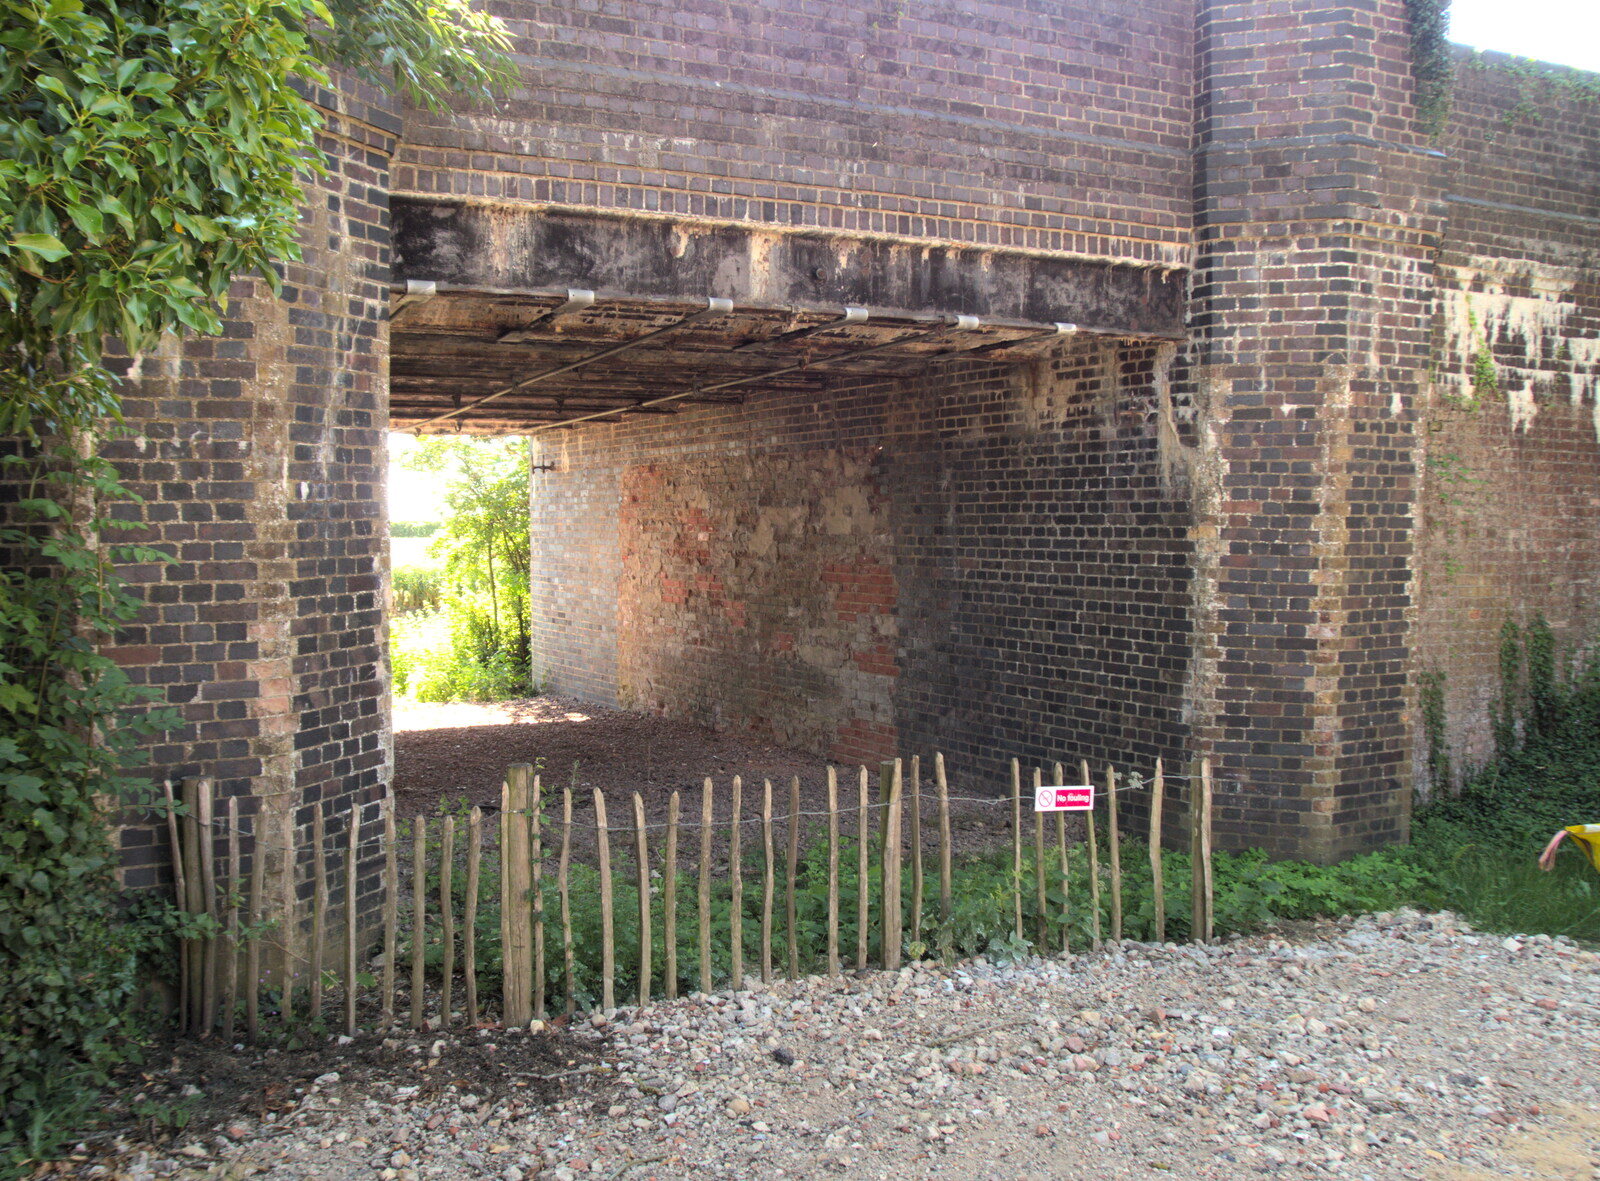 An old railway bridge in Yaxley from Lockdown Bike Rides and an Anniversary Picnic, Mellis and Brome, Suffolk - 3rd July 2020